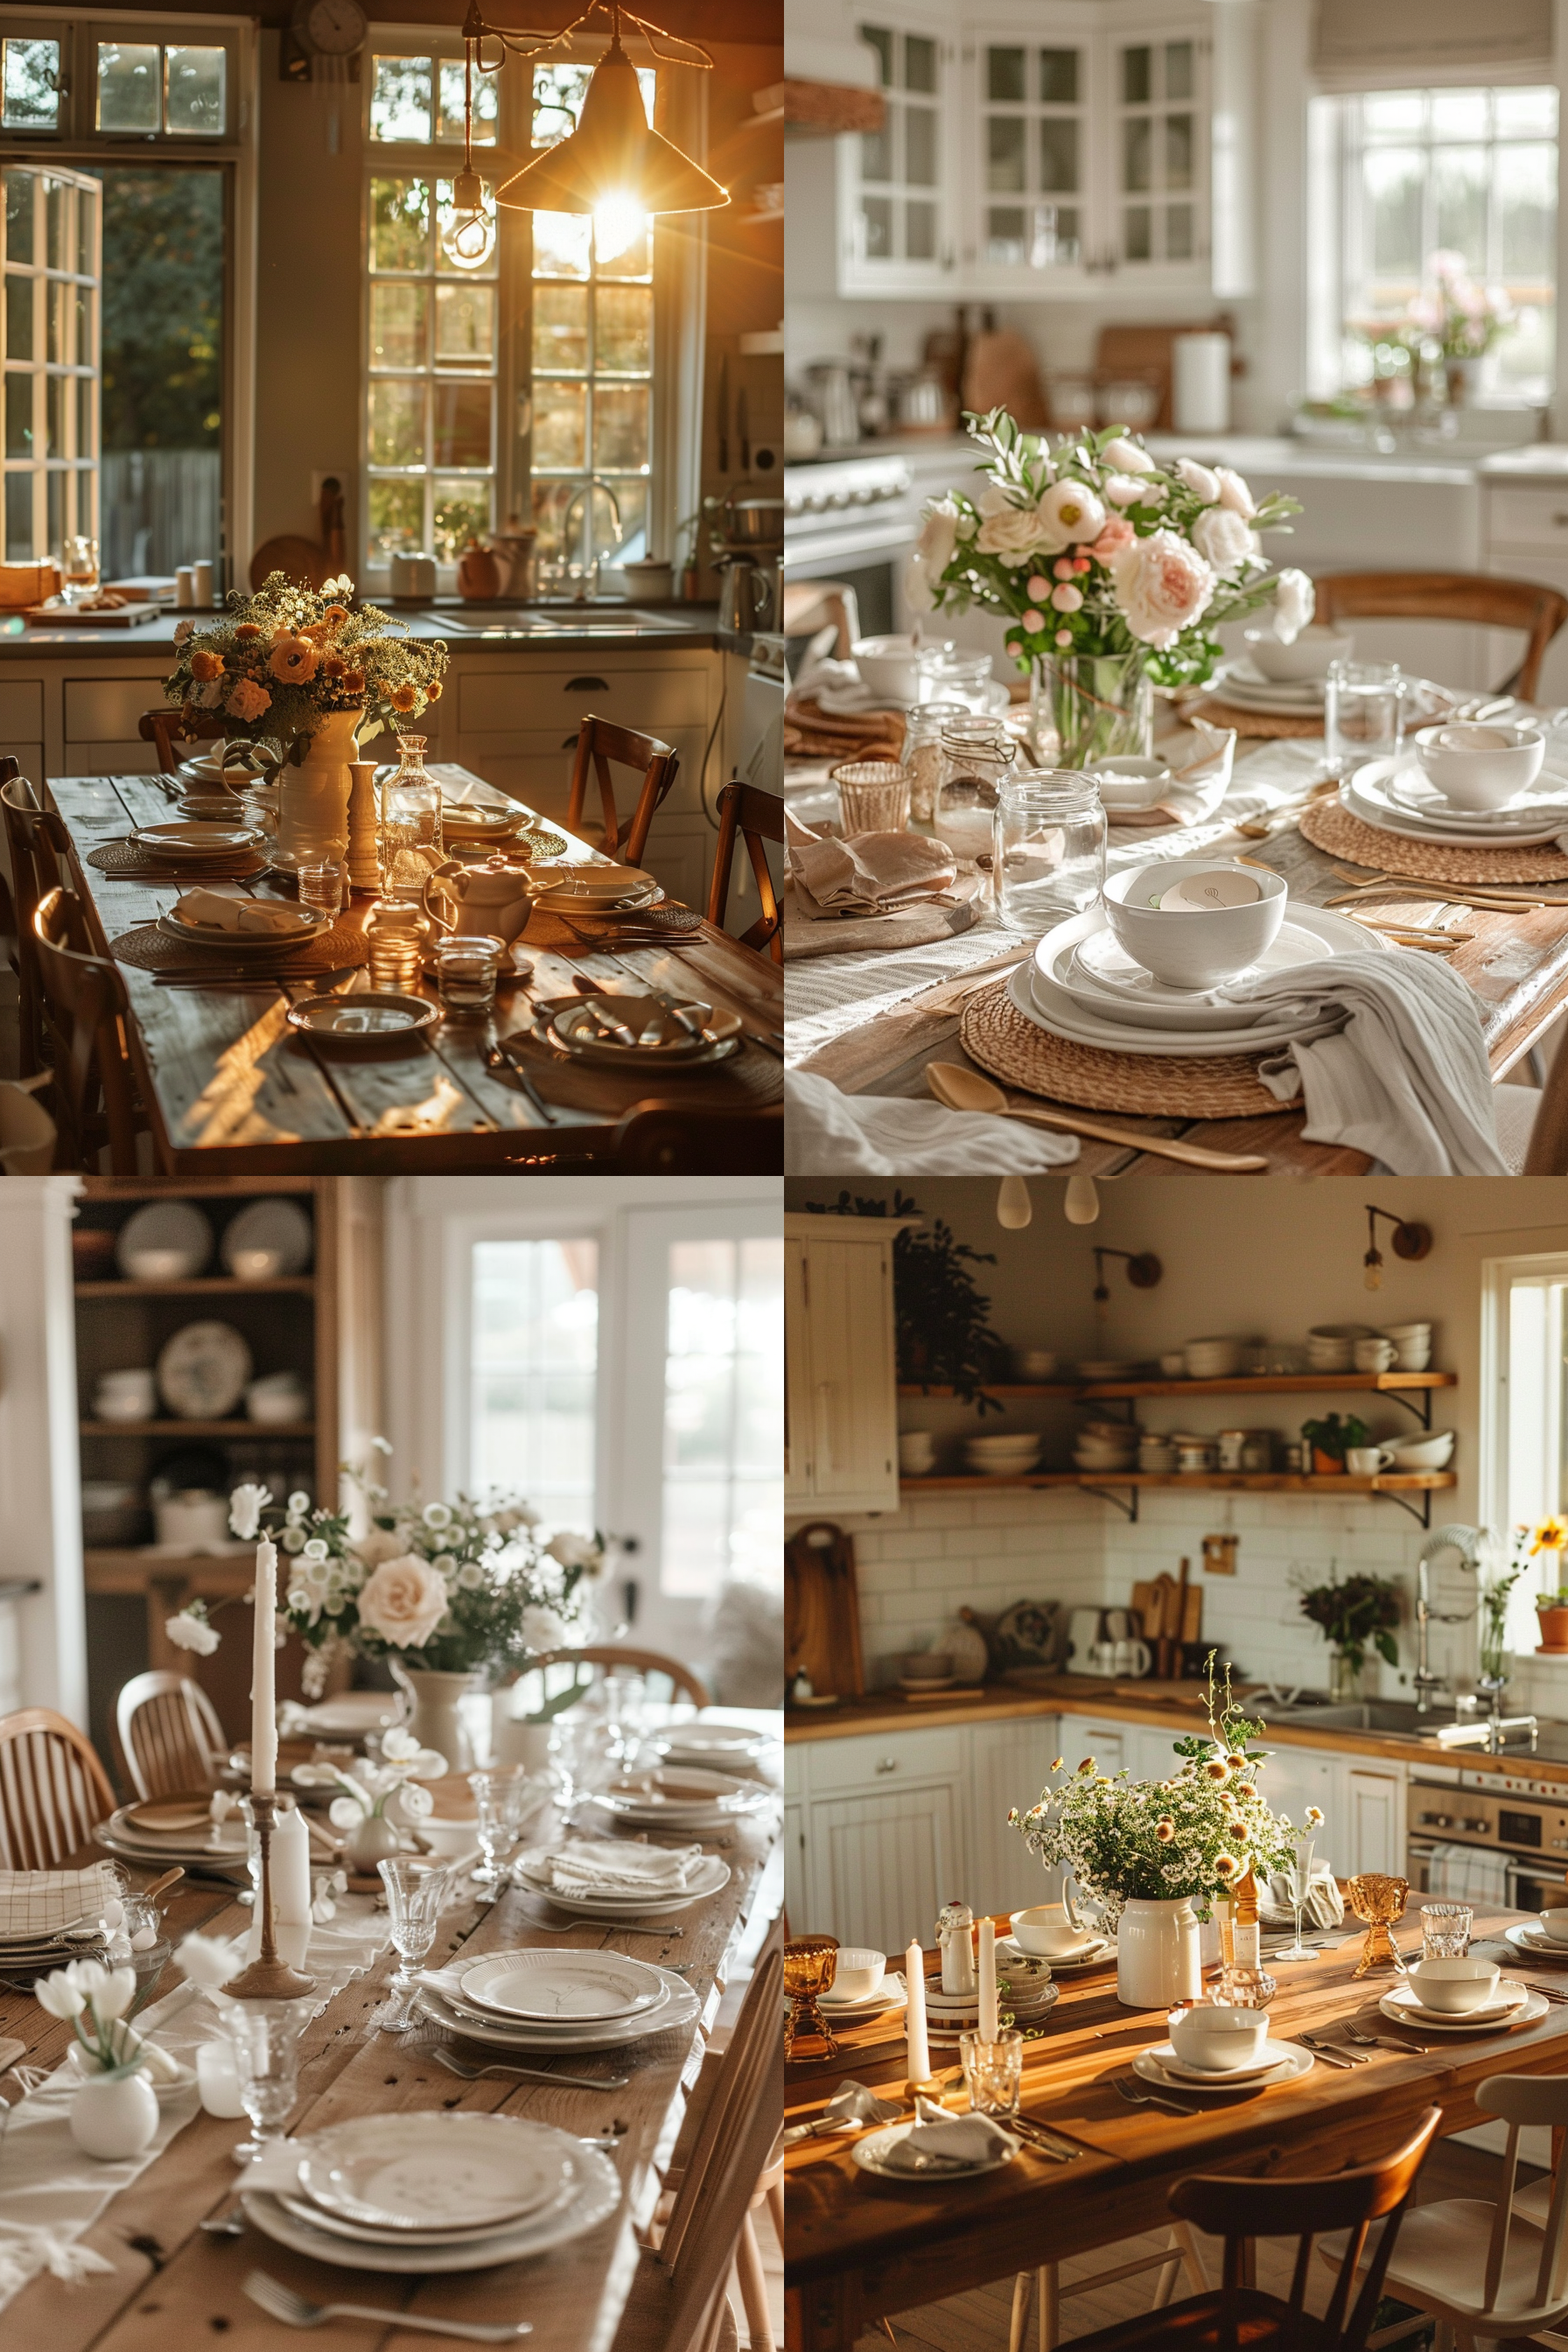 A collage of four cozy dining room and kitchen images with warm sunlight, elegant table settings, and fresh flowers.